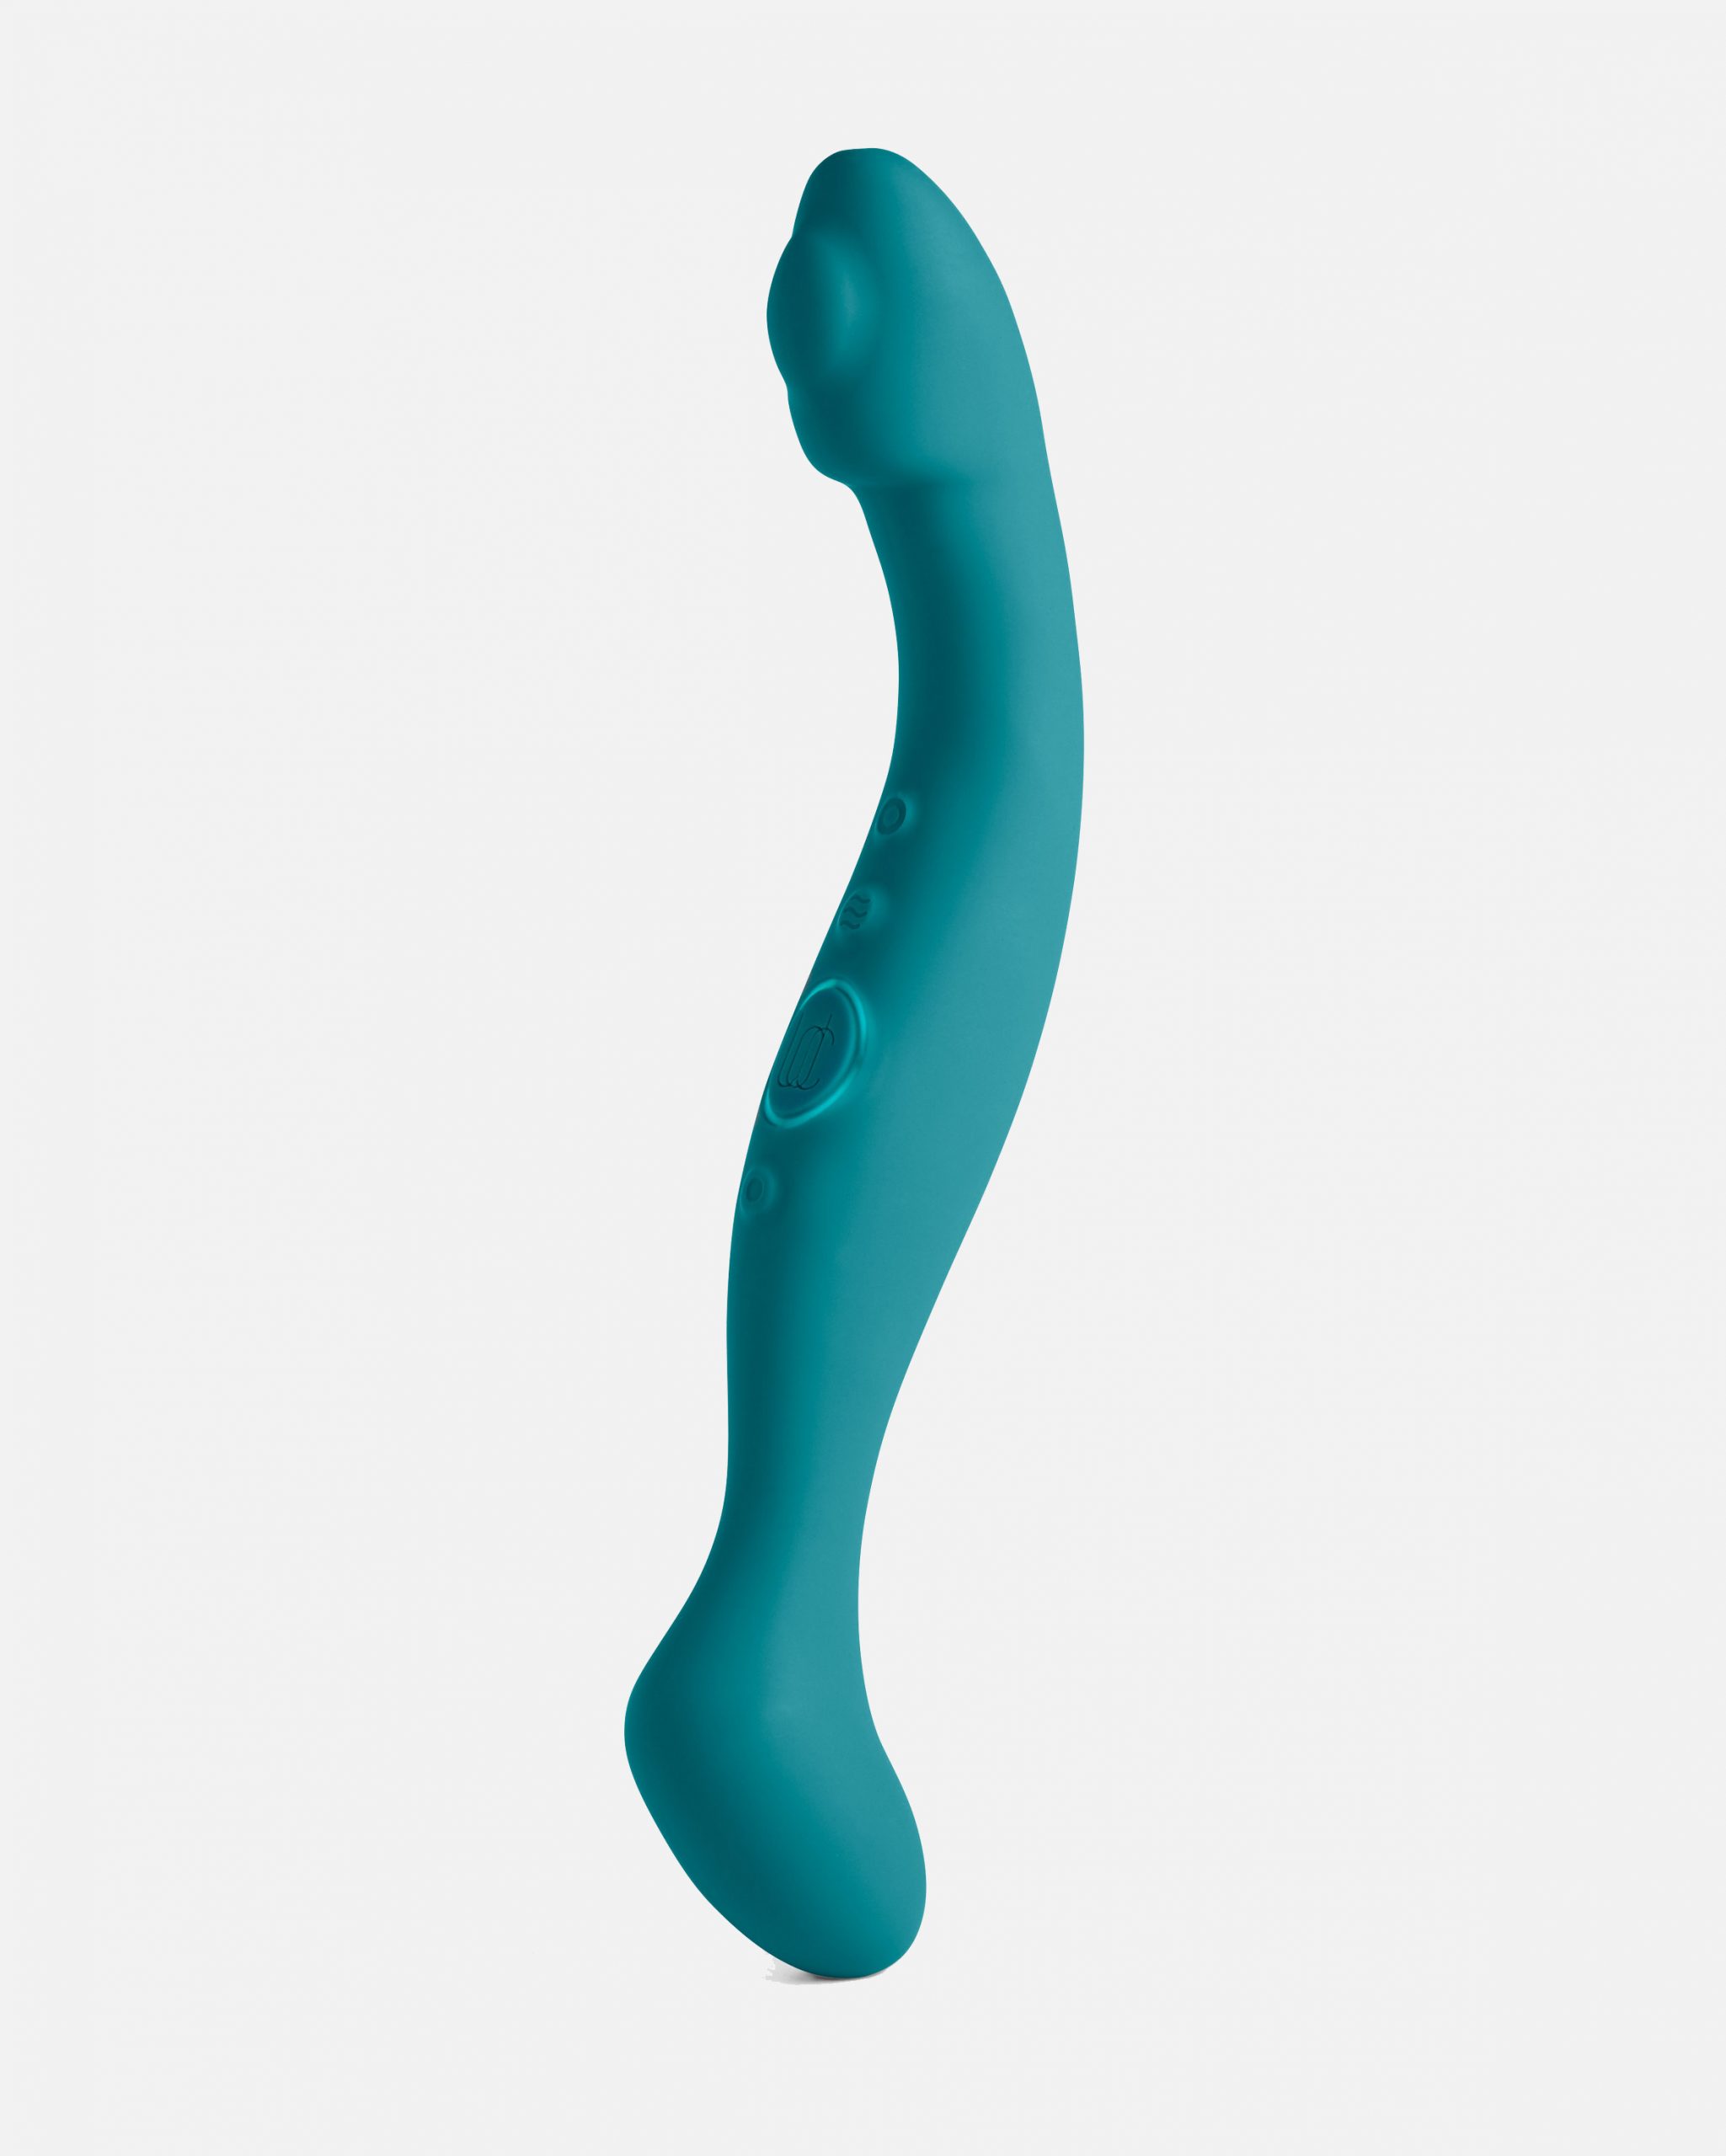 Sway, one of Lora DiCarlo's new warming sex toys